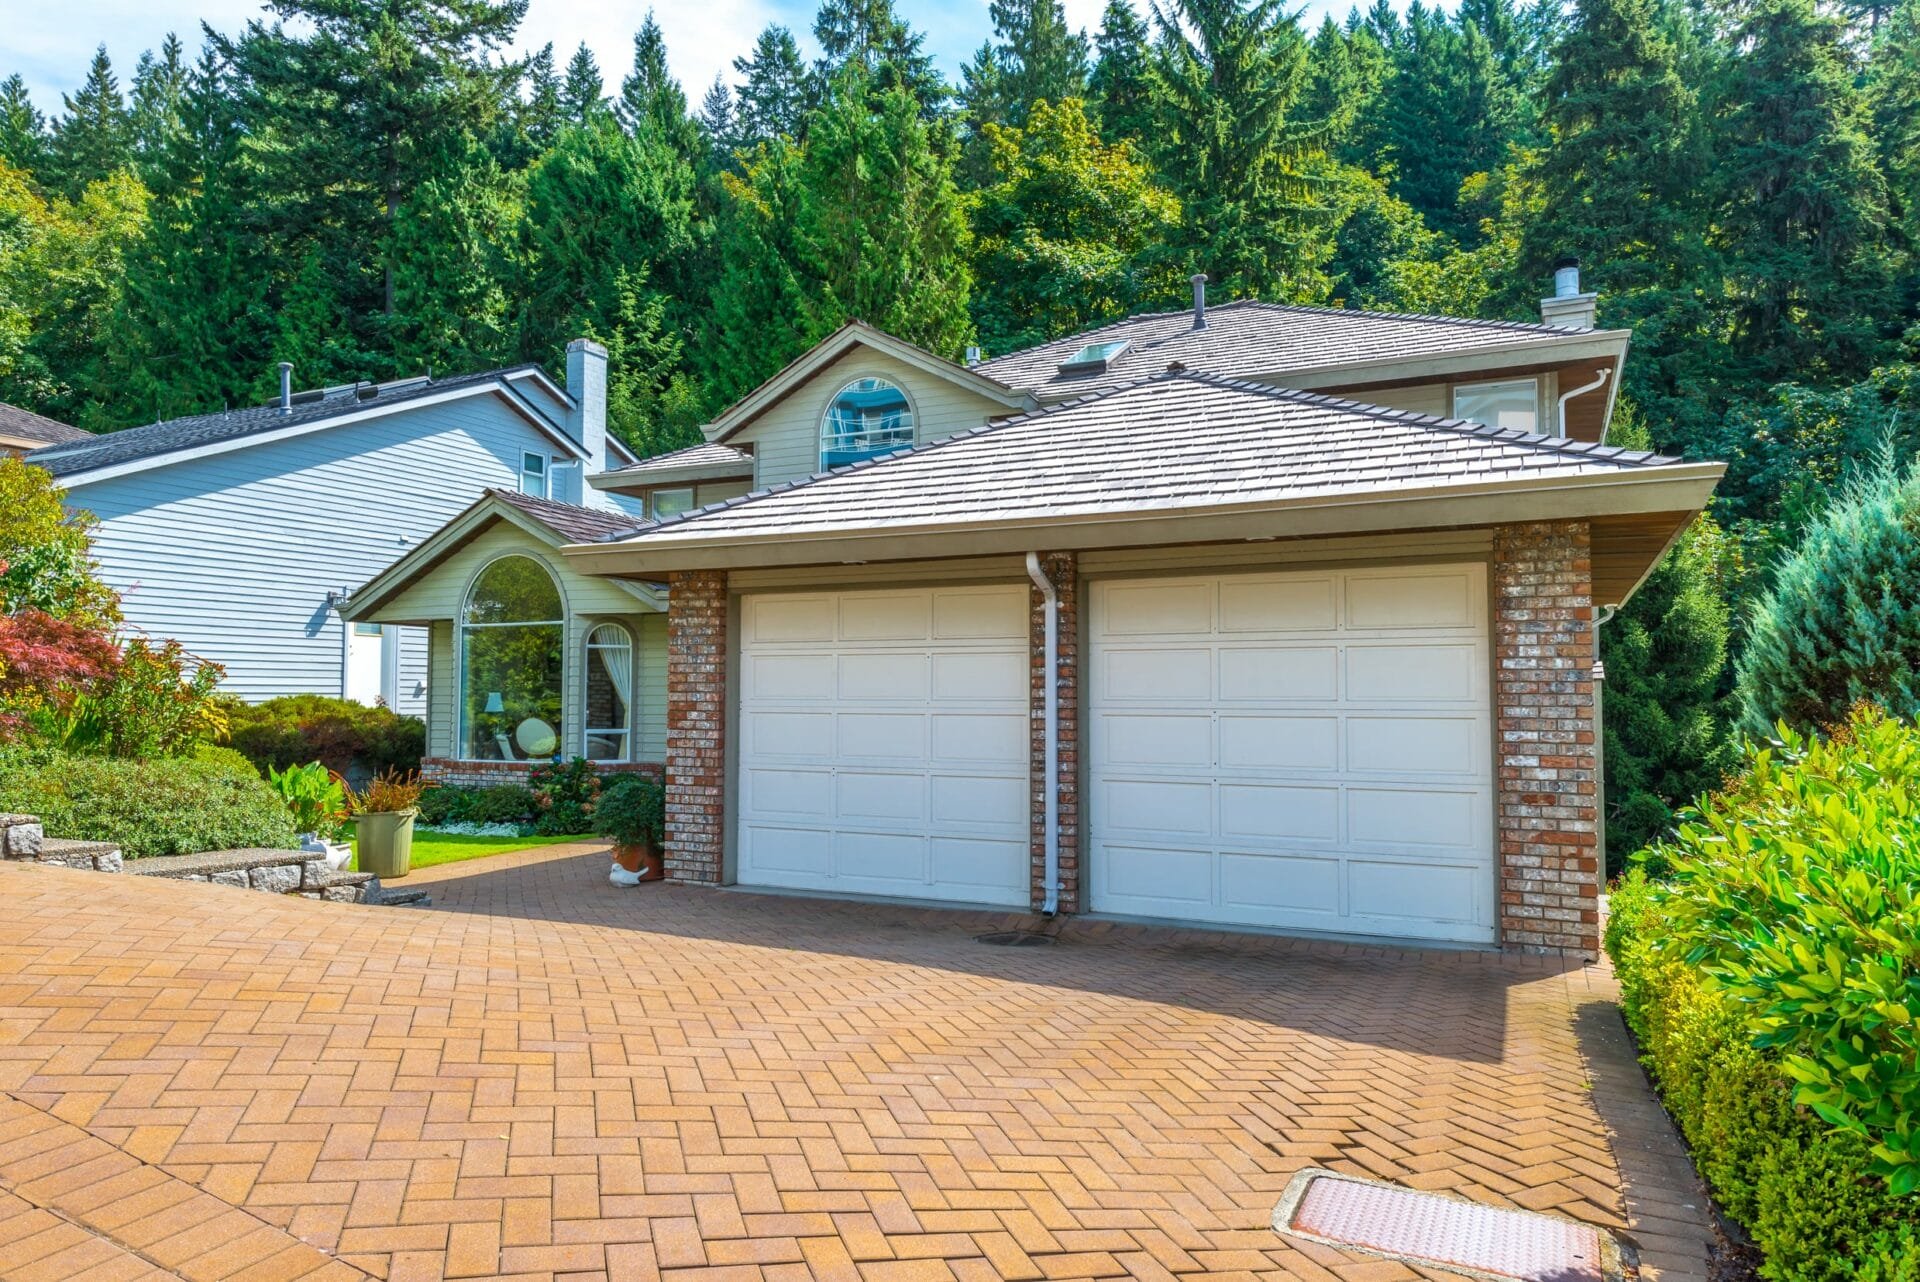 A suburban house with a double garage, white siding, and a shingled roof, surrounded by lush greenery and an interlocking paving system driveway.